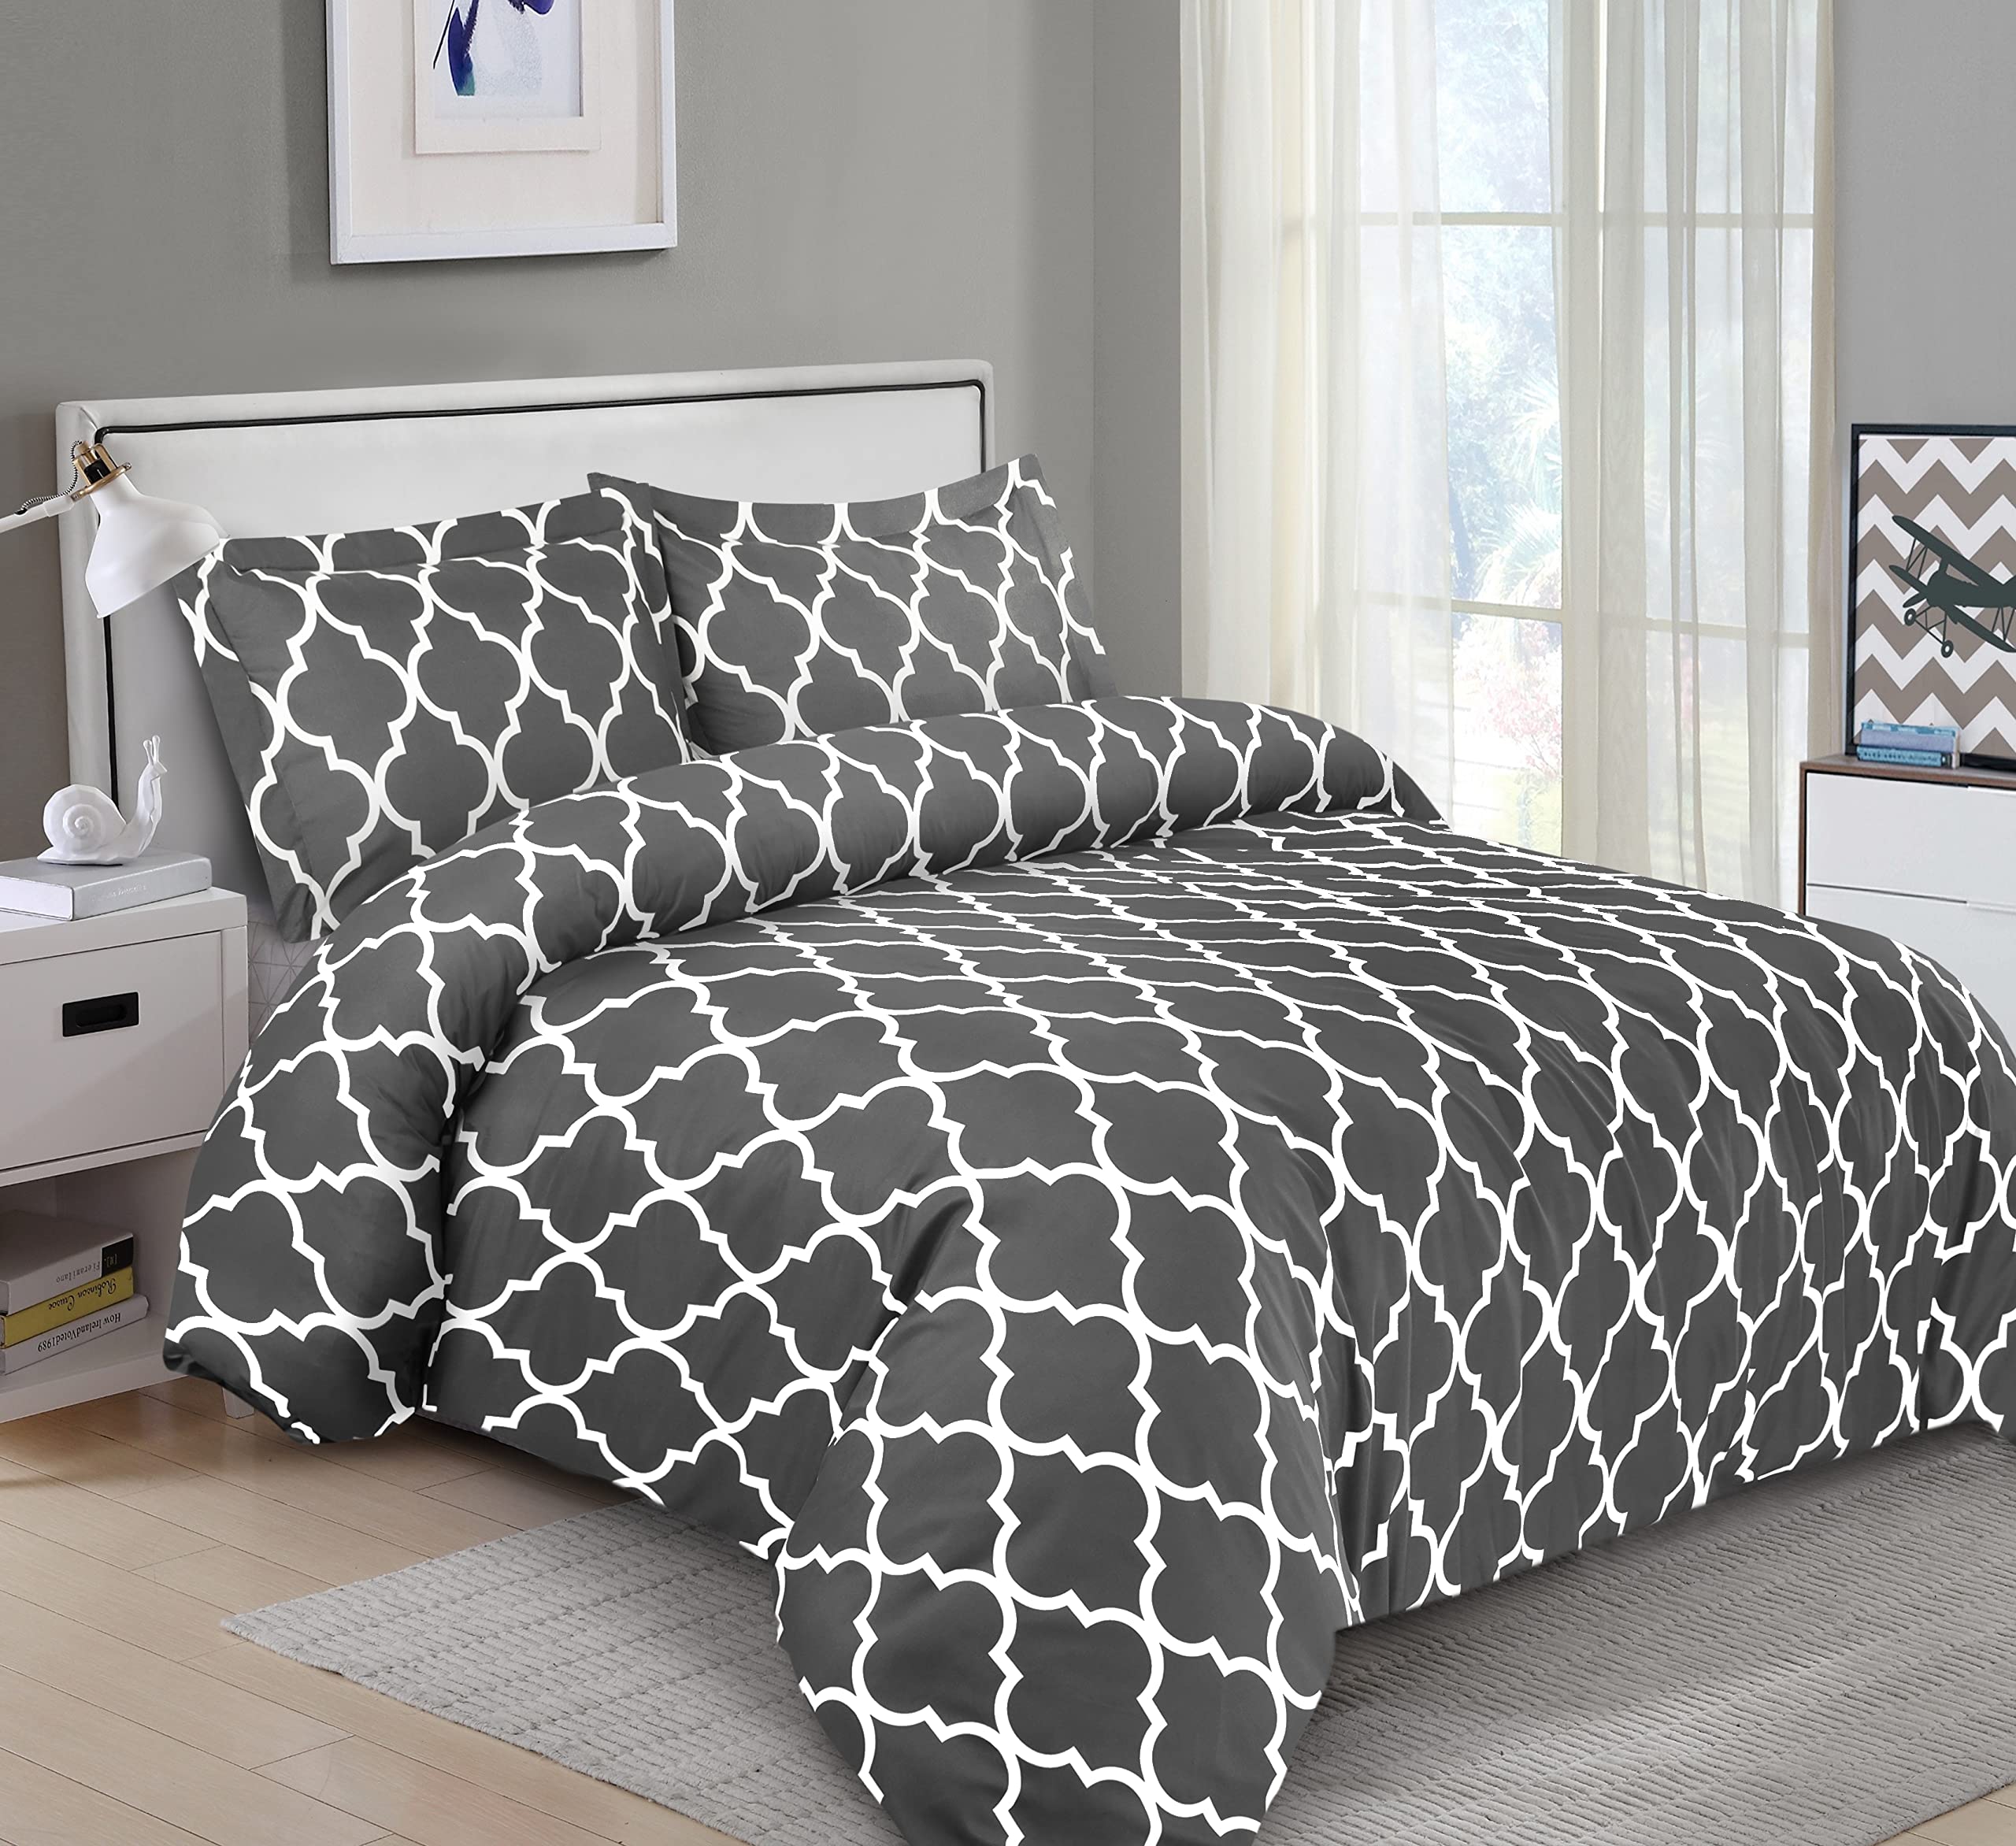 Book Cover Utopia Bedding Duvet Cover King Size Set - 1 Duvet Cover with 2 Pillow Shams - 3 Pieces Comforter Cover with Zipper Closure - Ultra Soft Brushed Microfiber, 104 X 90 Inches (King, Quatrefoil Grey) King Printed Grey